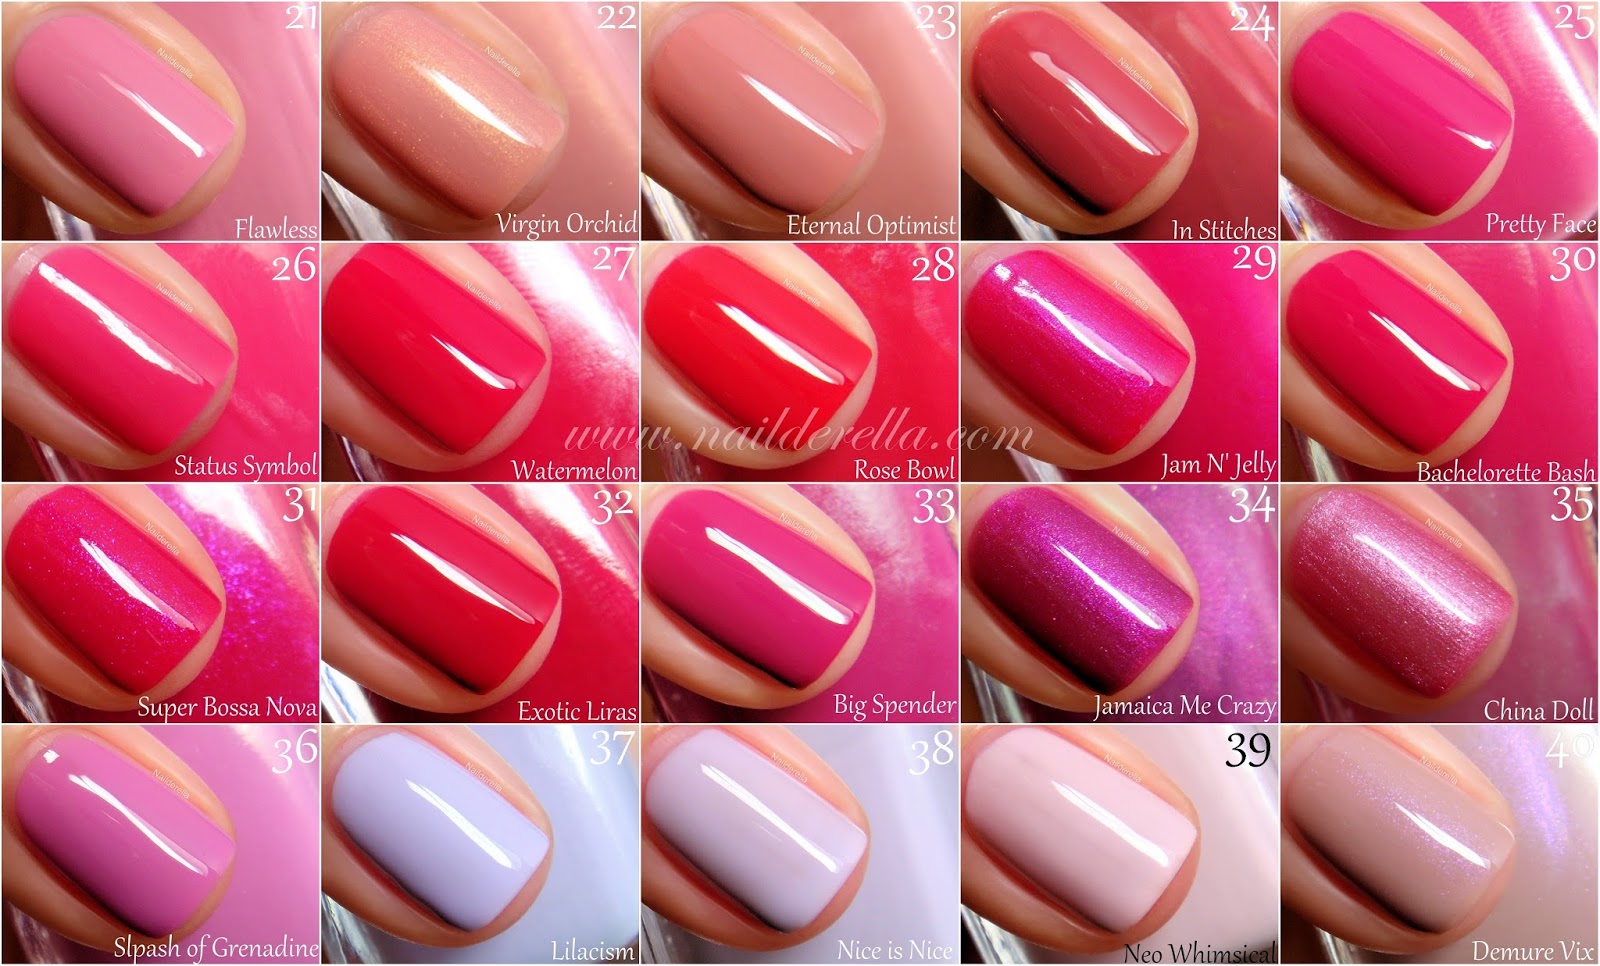 Essie Nail Polish Colors on Hand - wide 8